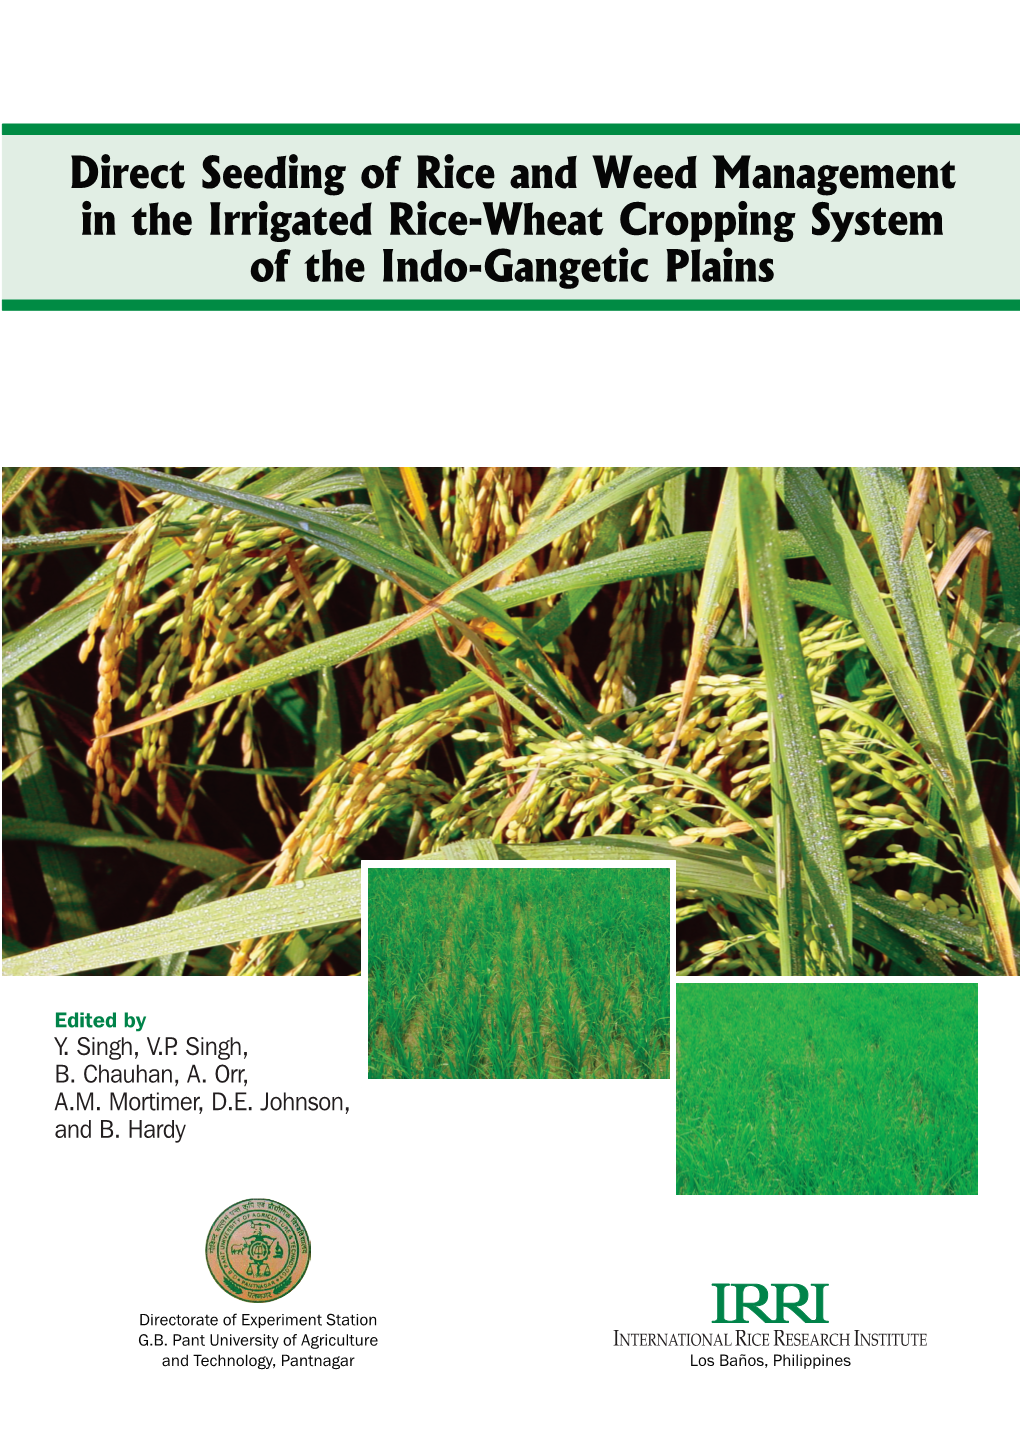 Direct Seeding of Rice and Weed Management in Direct Seeding of Rice and Weed Management in the Irrigated Rice-Wheat Cropping System of the Indo-Gangetic Plains